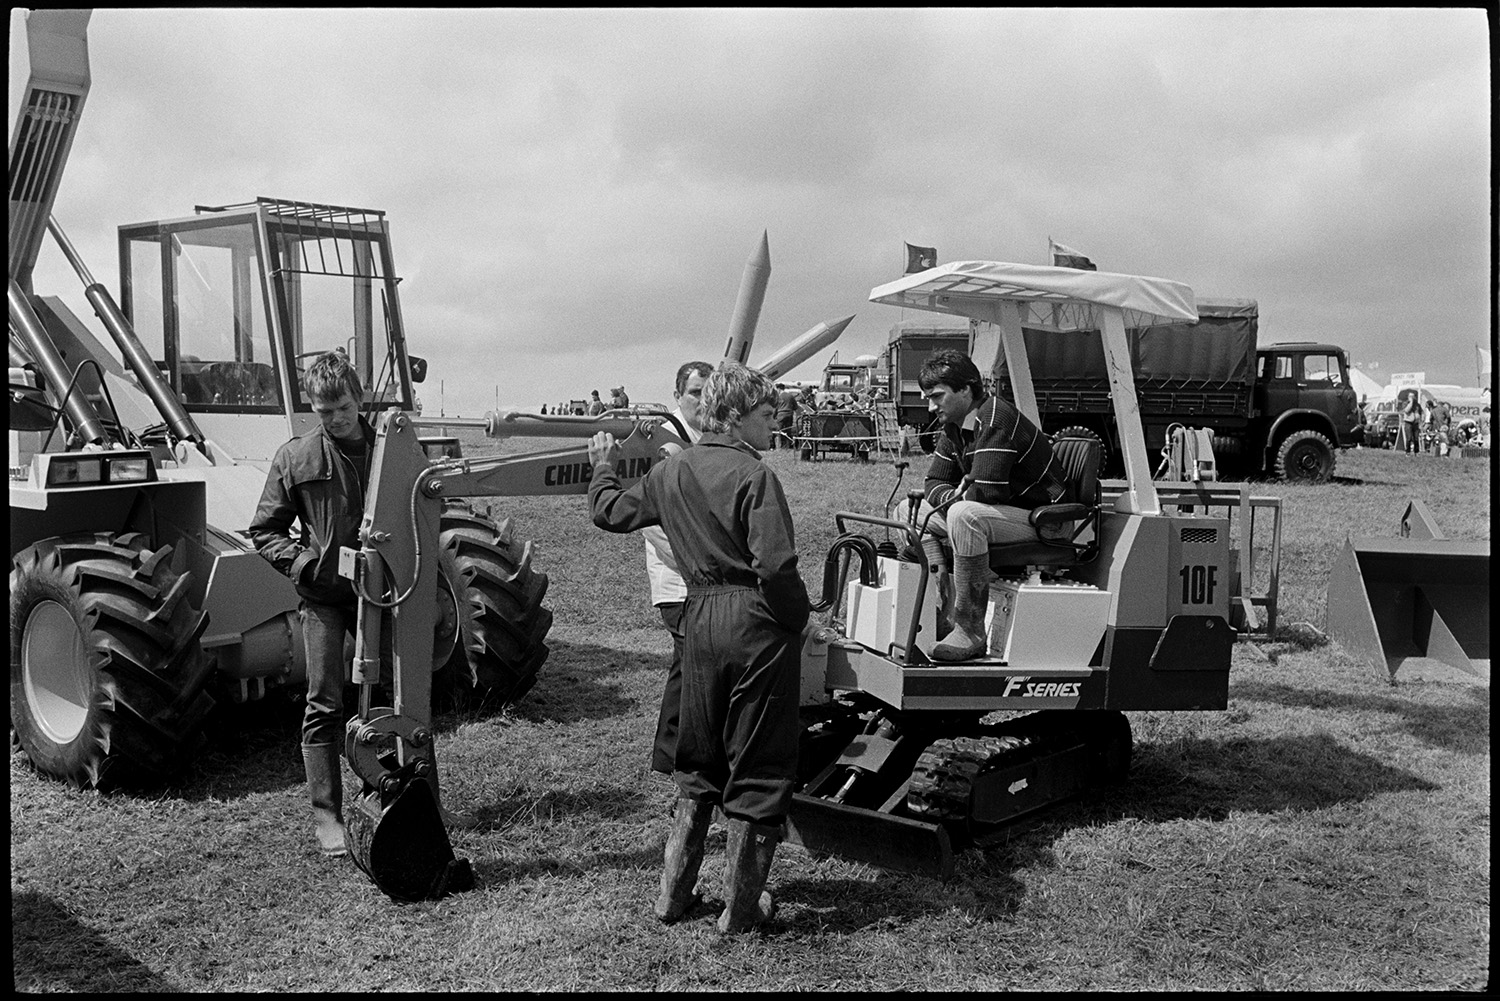 Agricultural show, judging sheep. Prize cattle in pens, spectators.
[Agricultural machinery on display at the North Devon Show near Alverdiscott. Four men are looking at a digger. Lorries, tents and spectators are visible in the background.]